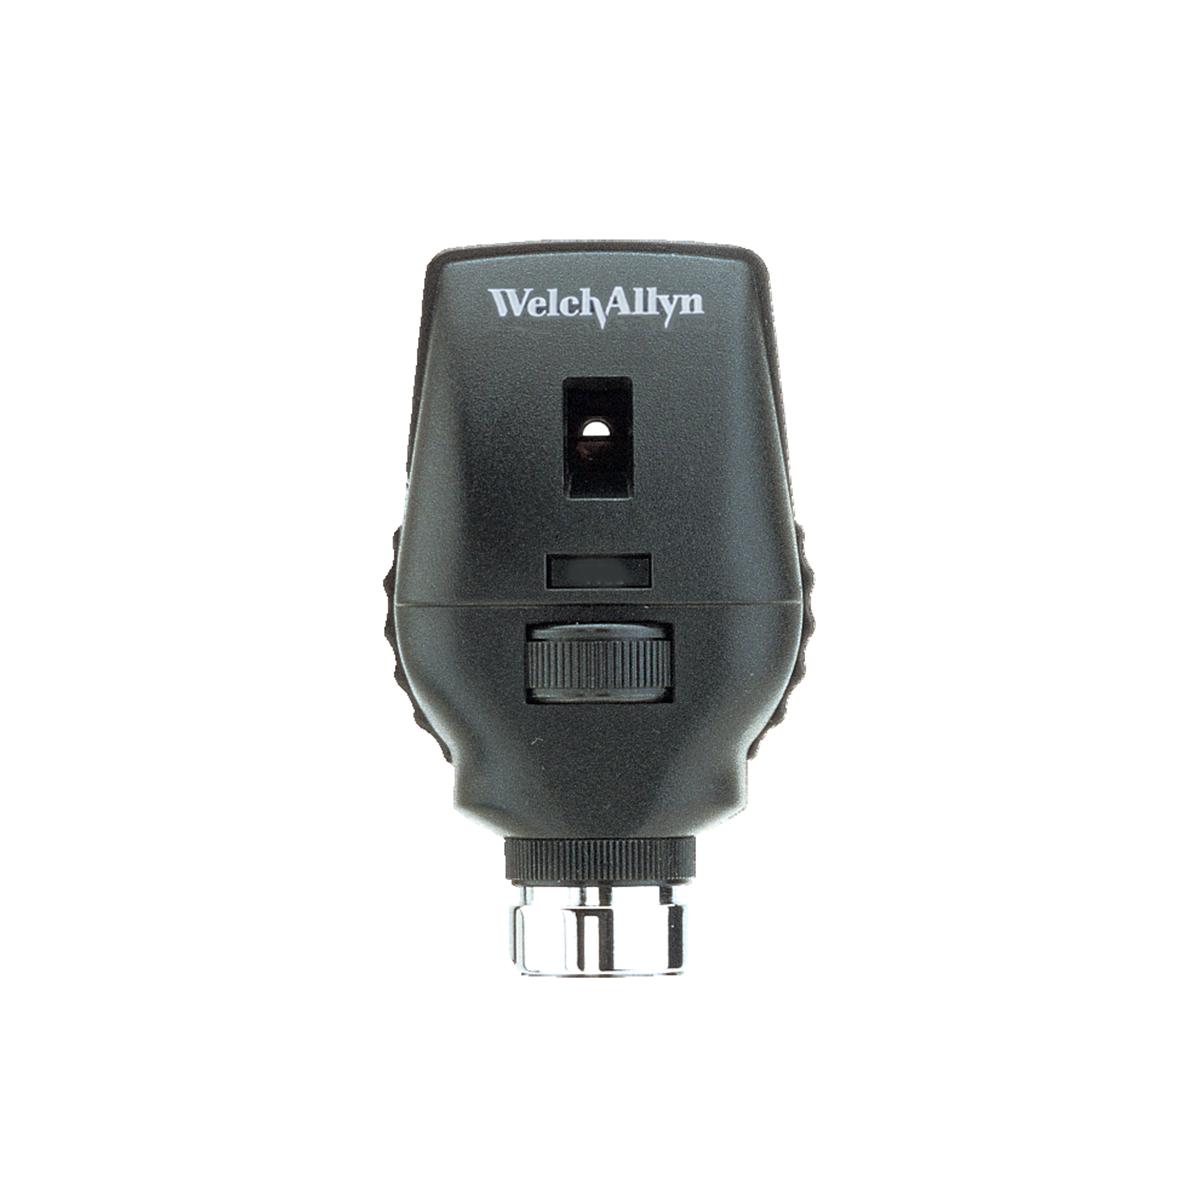 3.5V Standard Ophthalmoscope Veterinary, dial shown